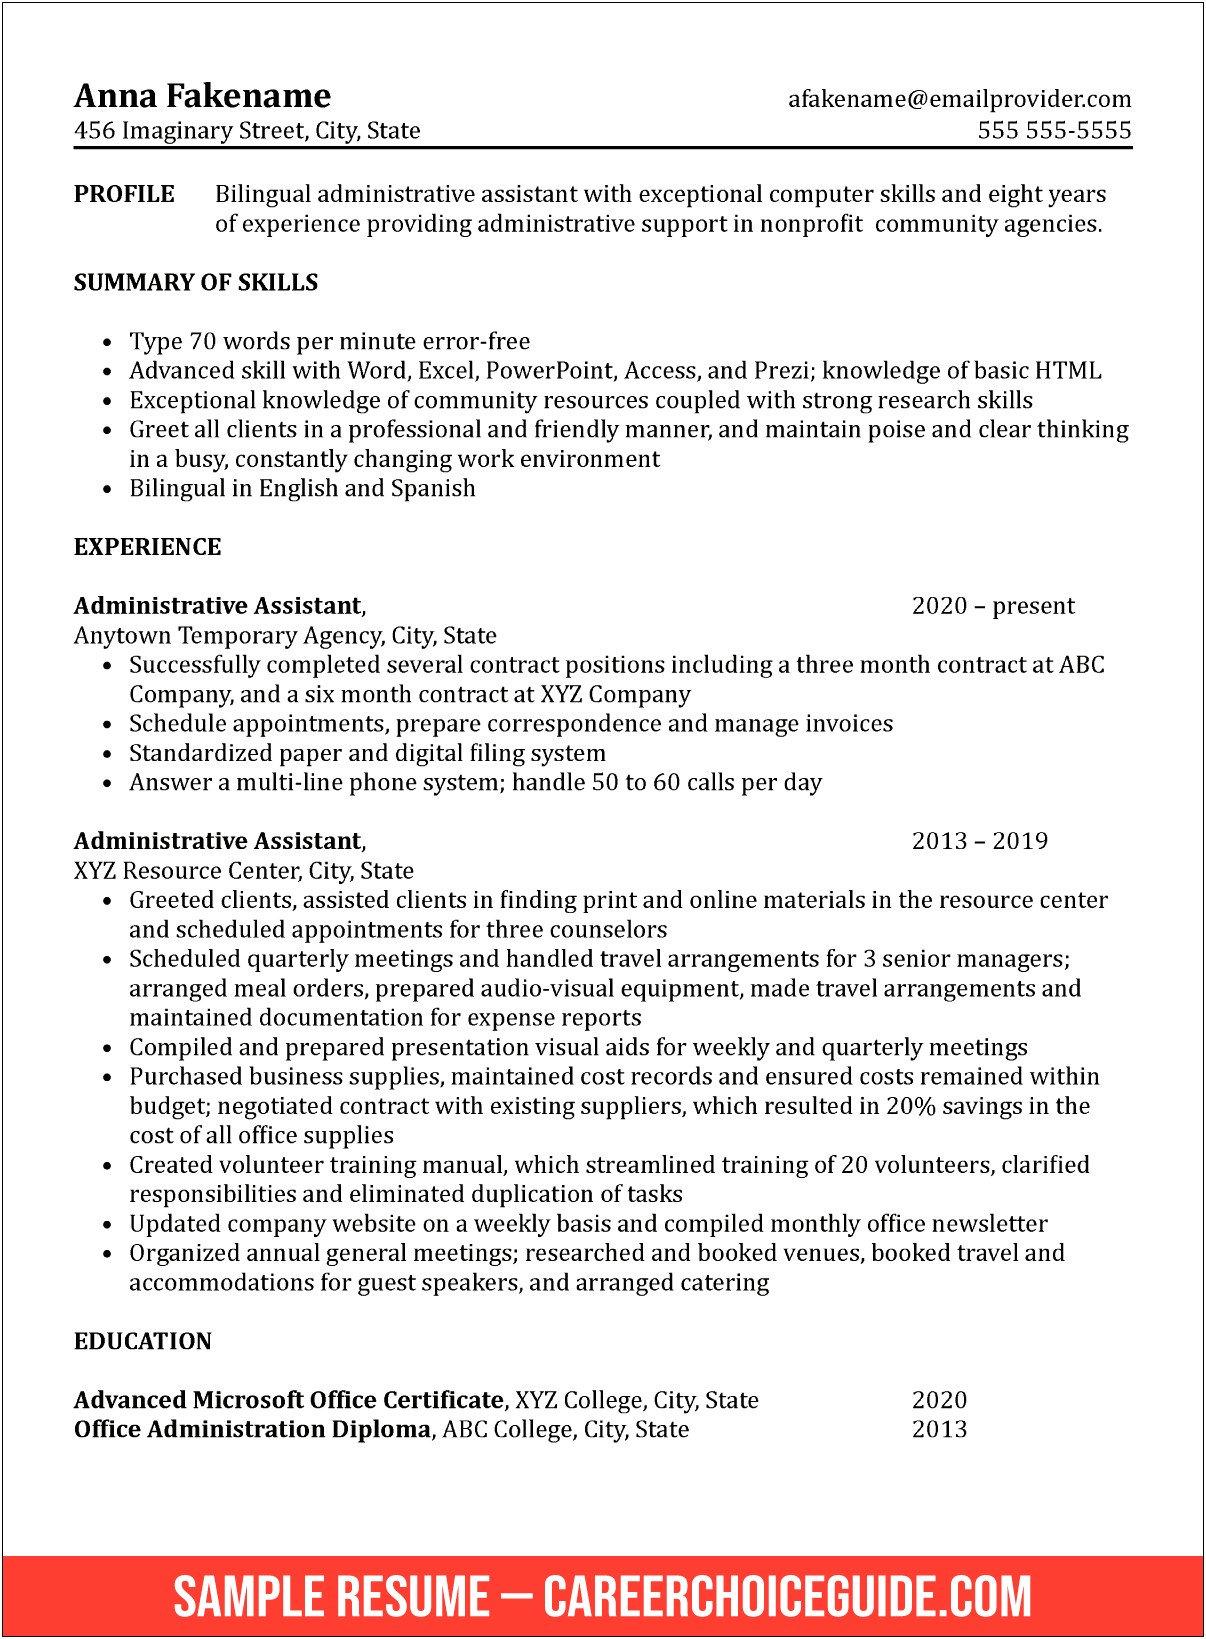 Specific Skills For Administrative Assistant Resume